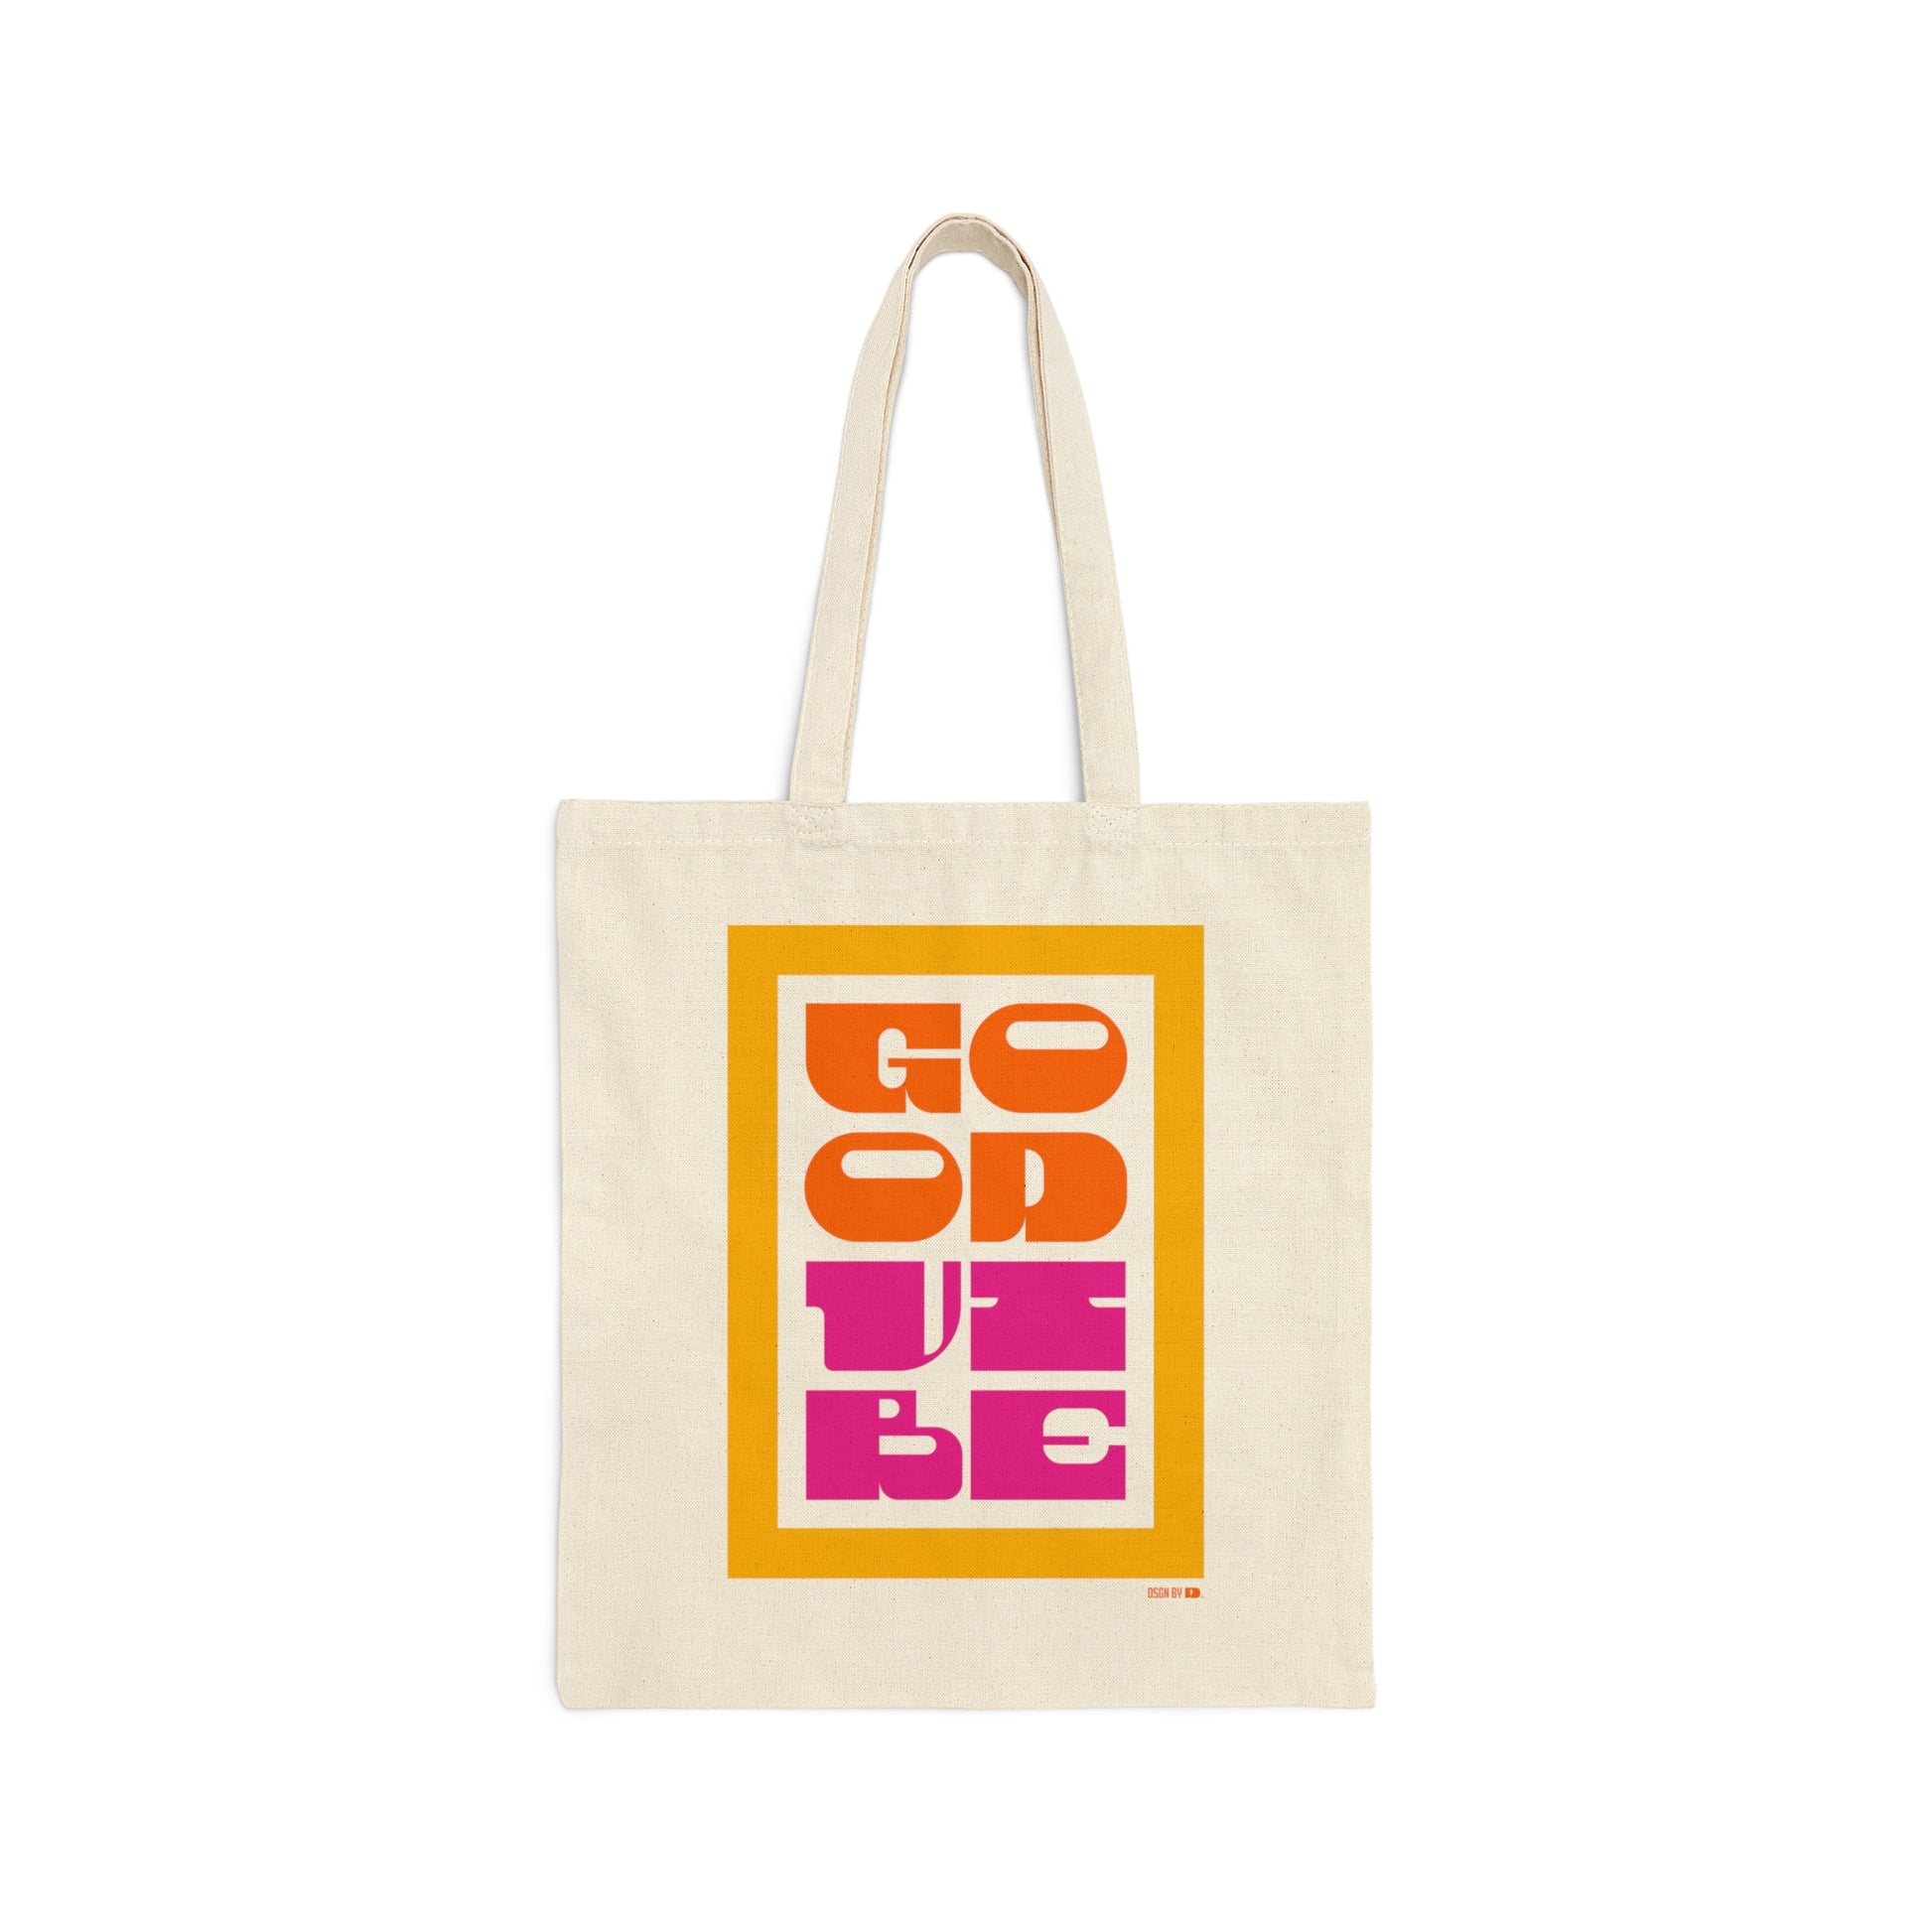 Cotton canvas tote bag with yellow, orange, and pink type saying "Good Vibe."